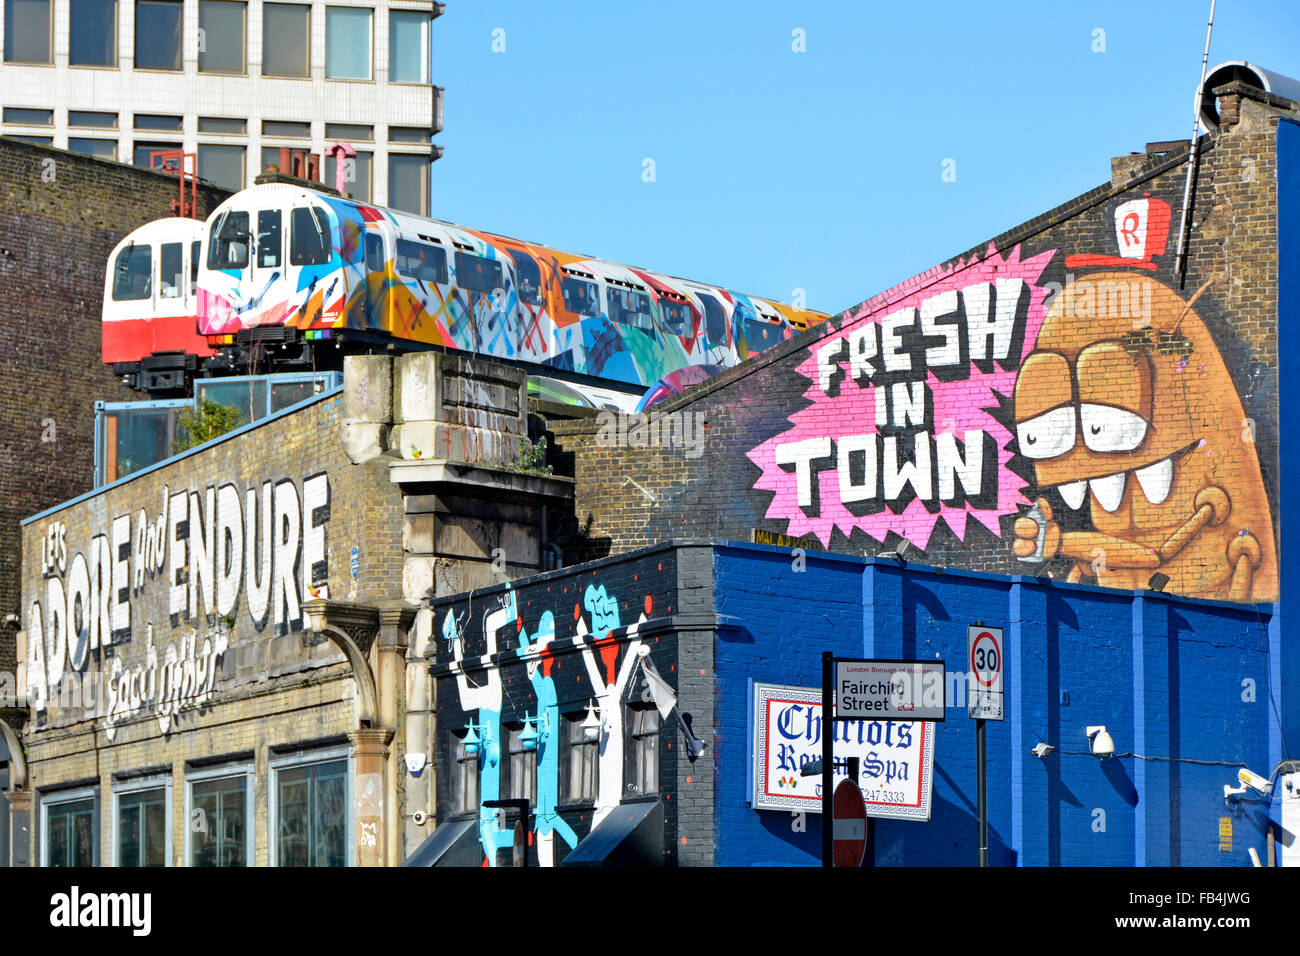 Recycling train carriages as artists studios on top old railway viaduct walls used for arty graffiti village underground Shoreditch London England UK Stock Photo